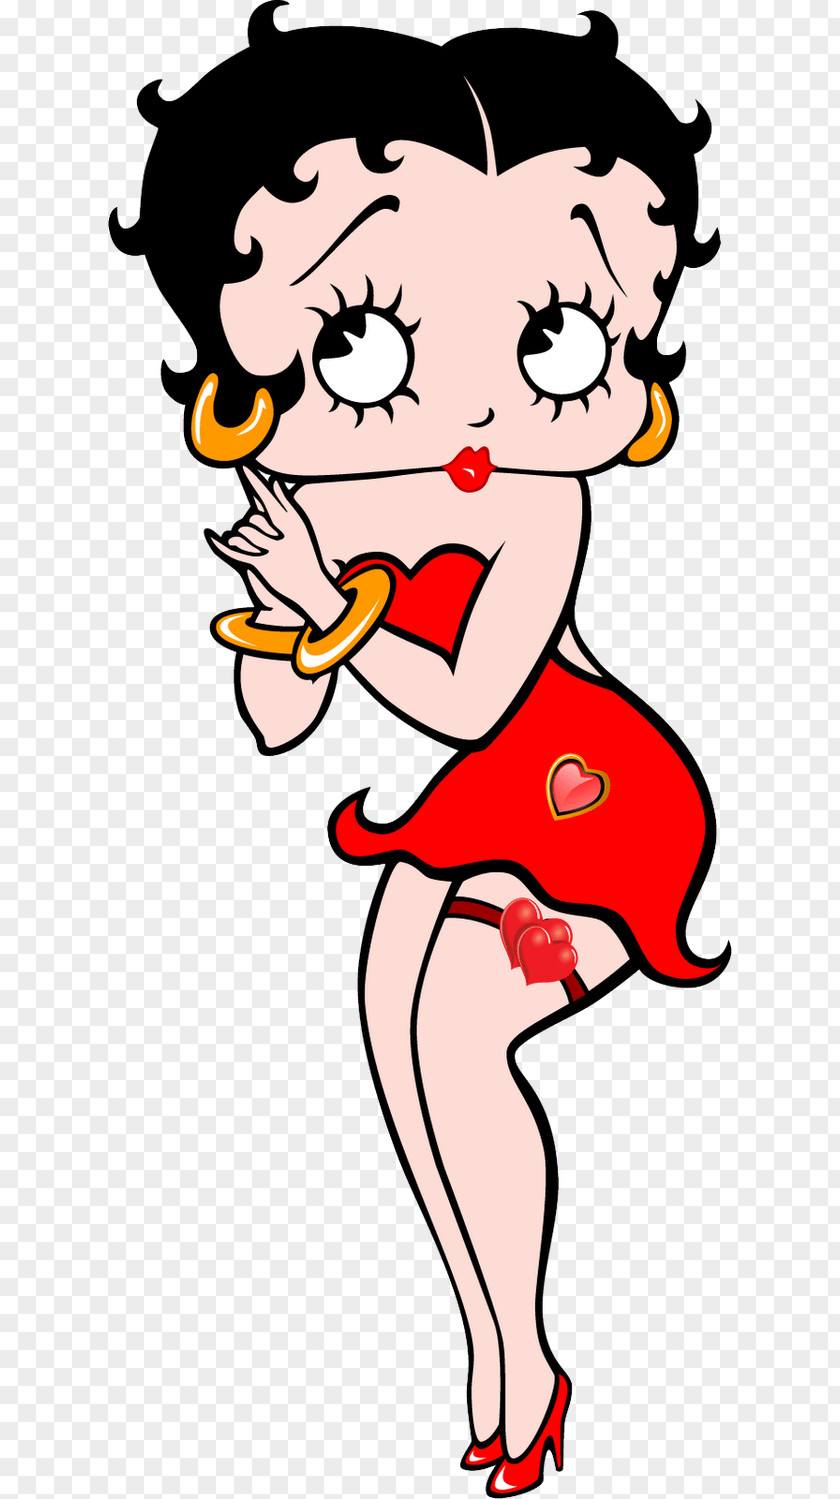 Cartoon Character Betty Boop High-definition Video Animation Wallpaper PNG